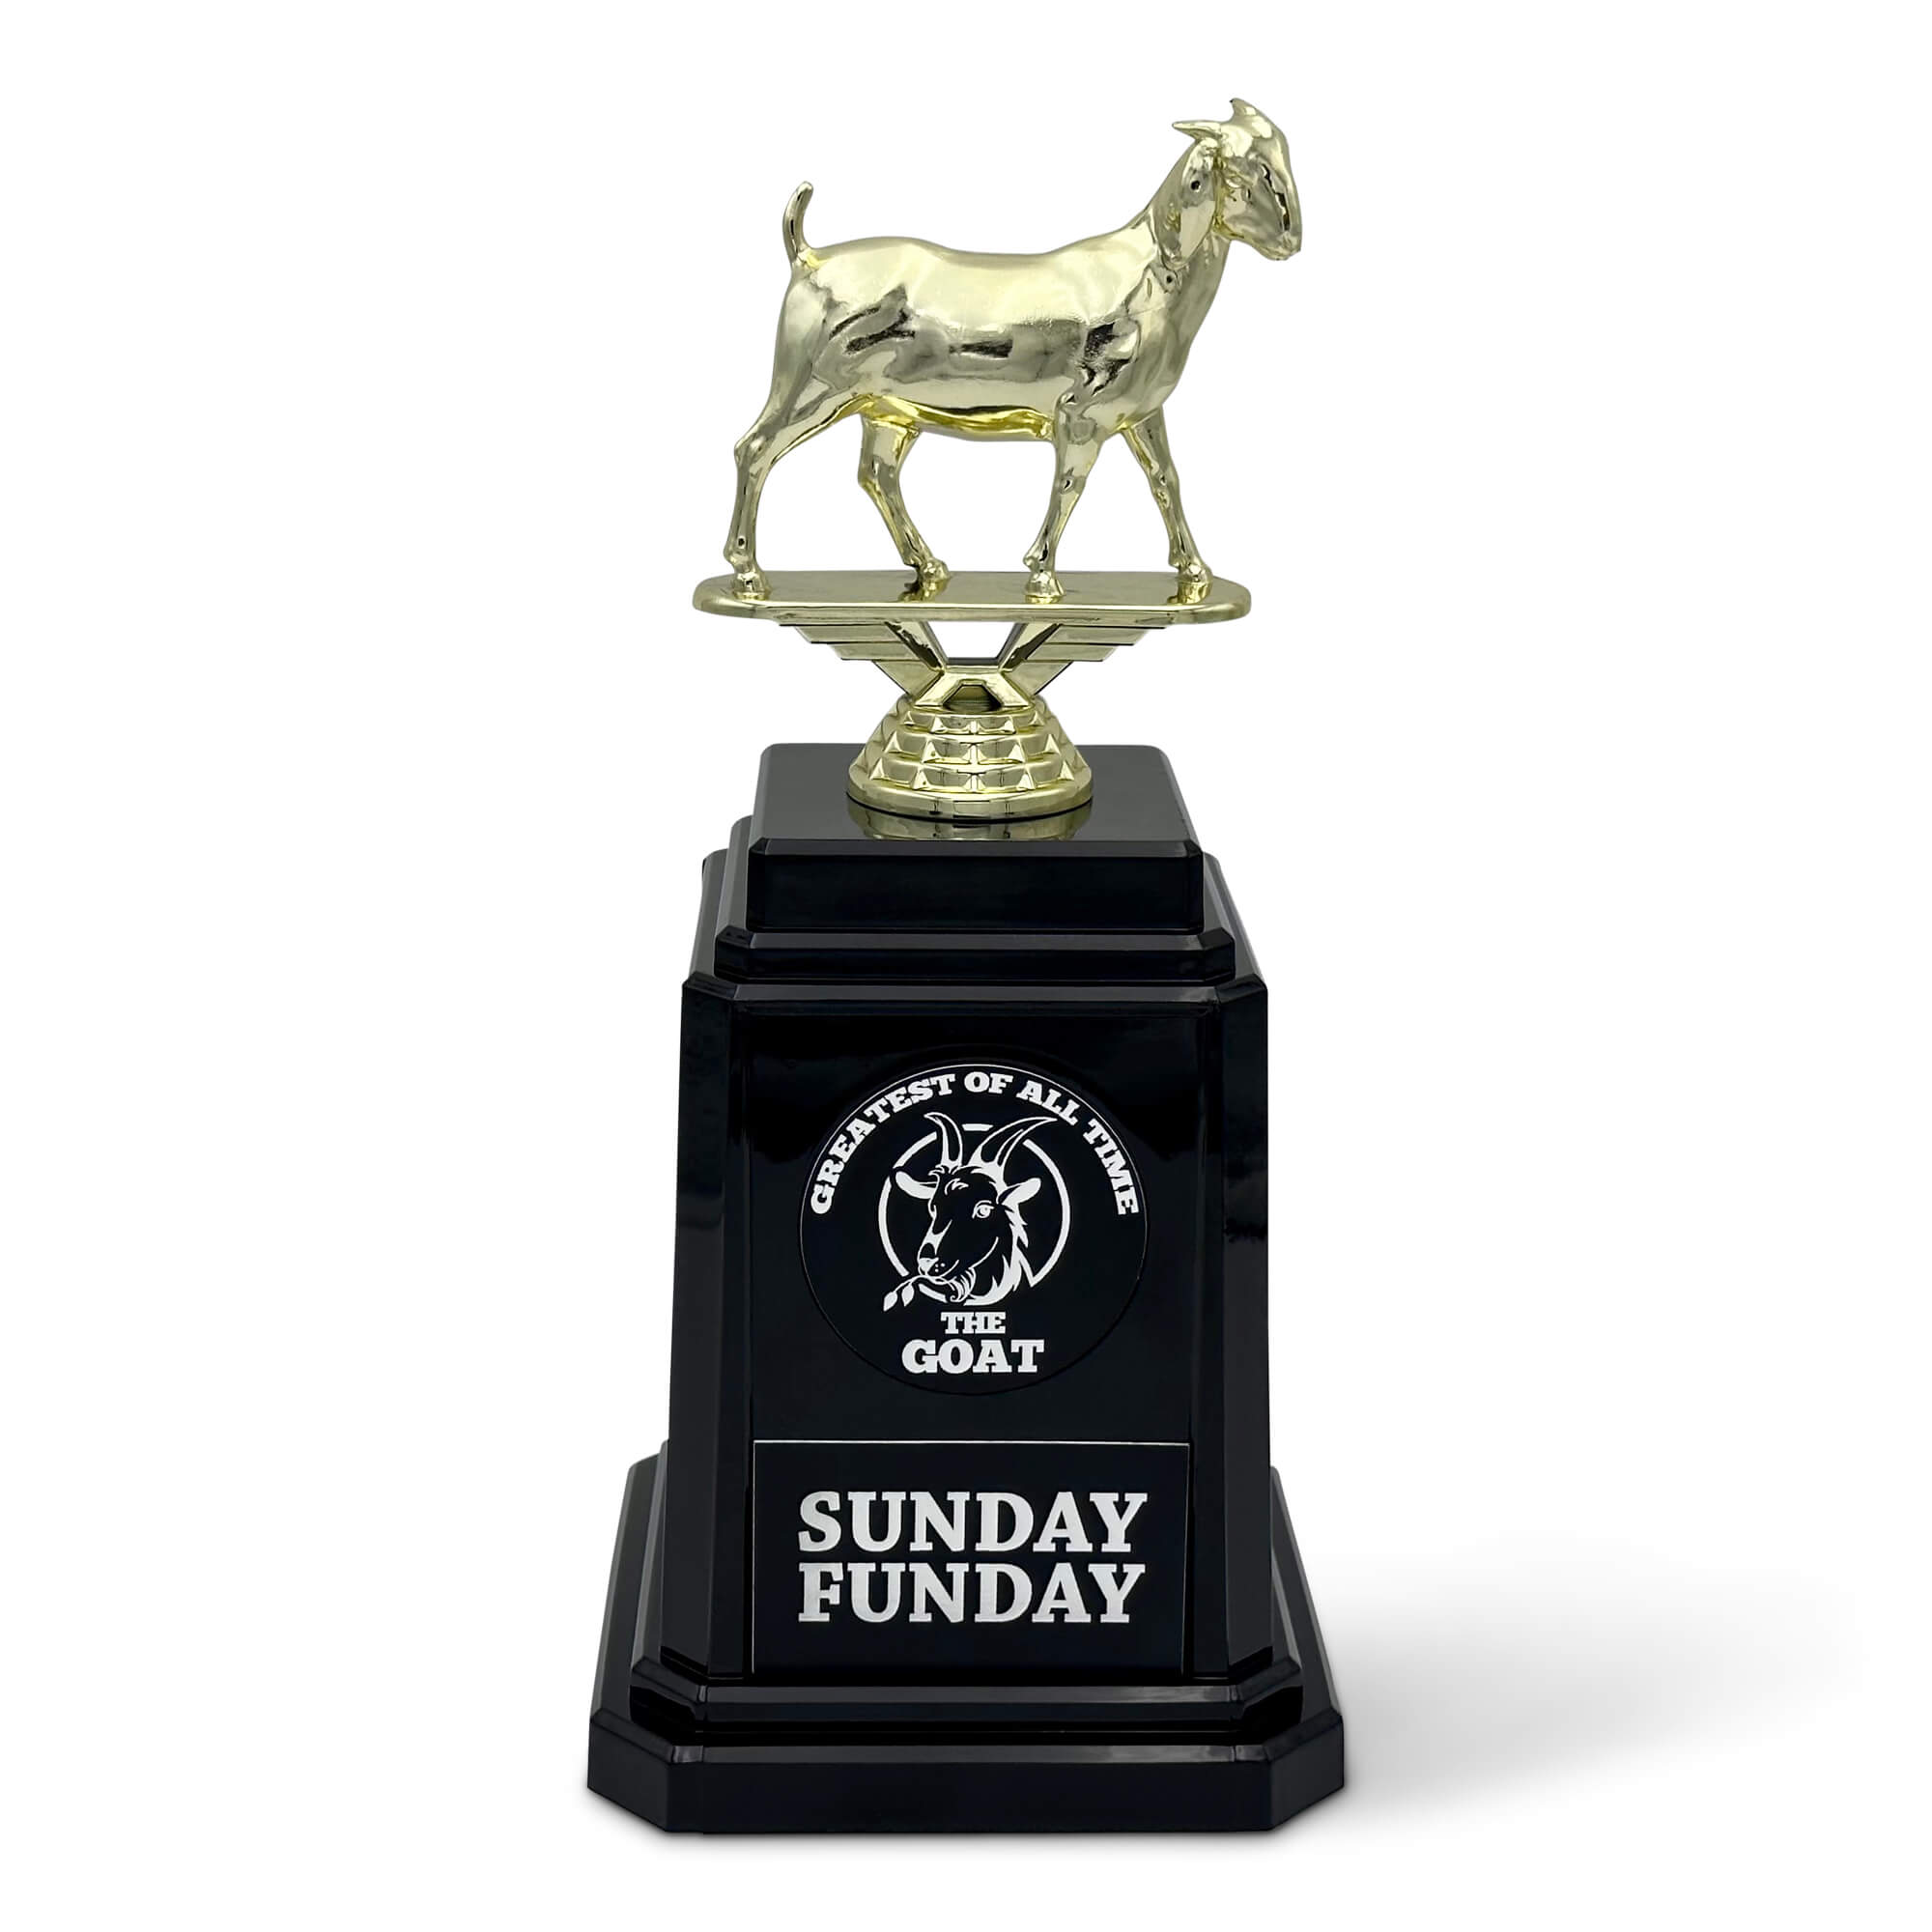 The GOAT Perpetual Trophy